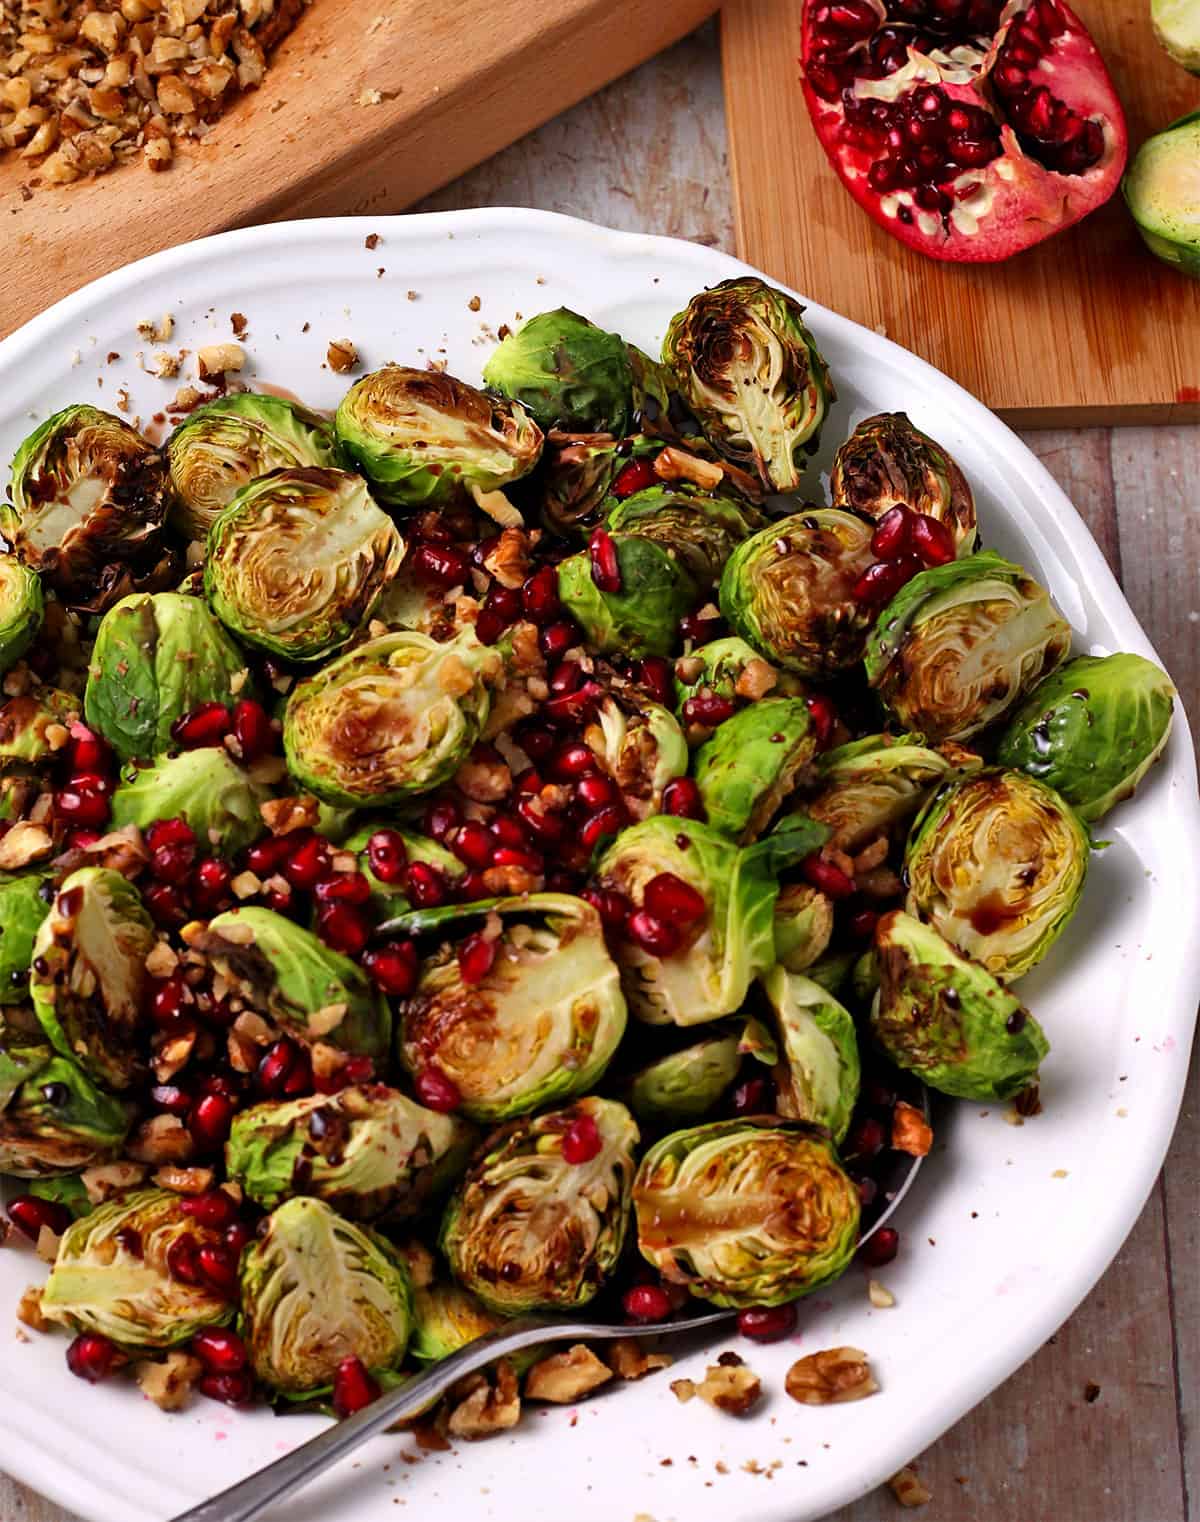 A bowl of brussels sprouts with pomegranate seeds, walnuts, and a spoon.